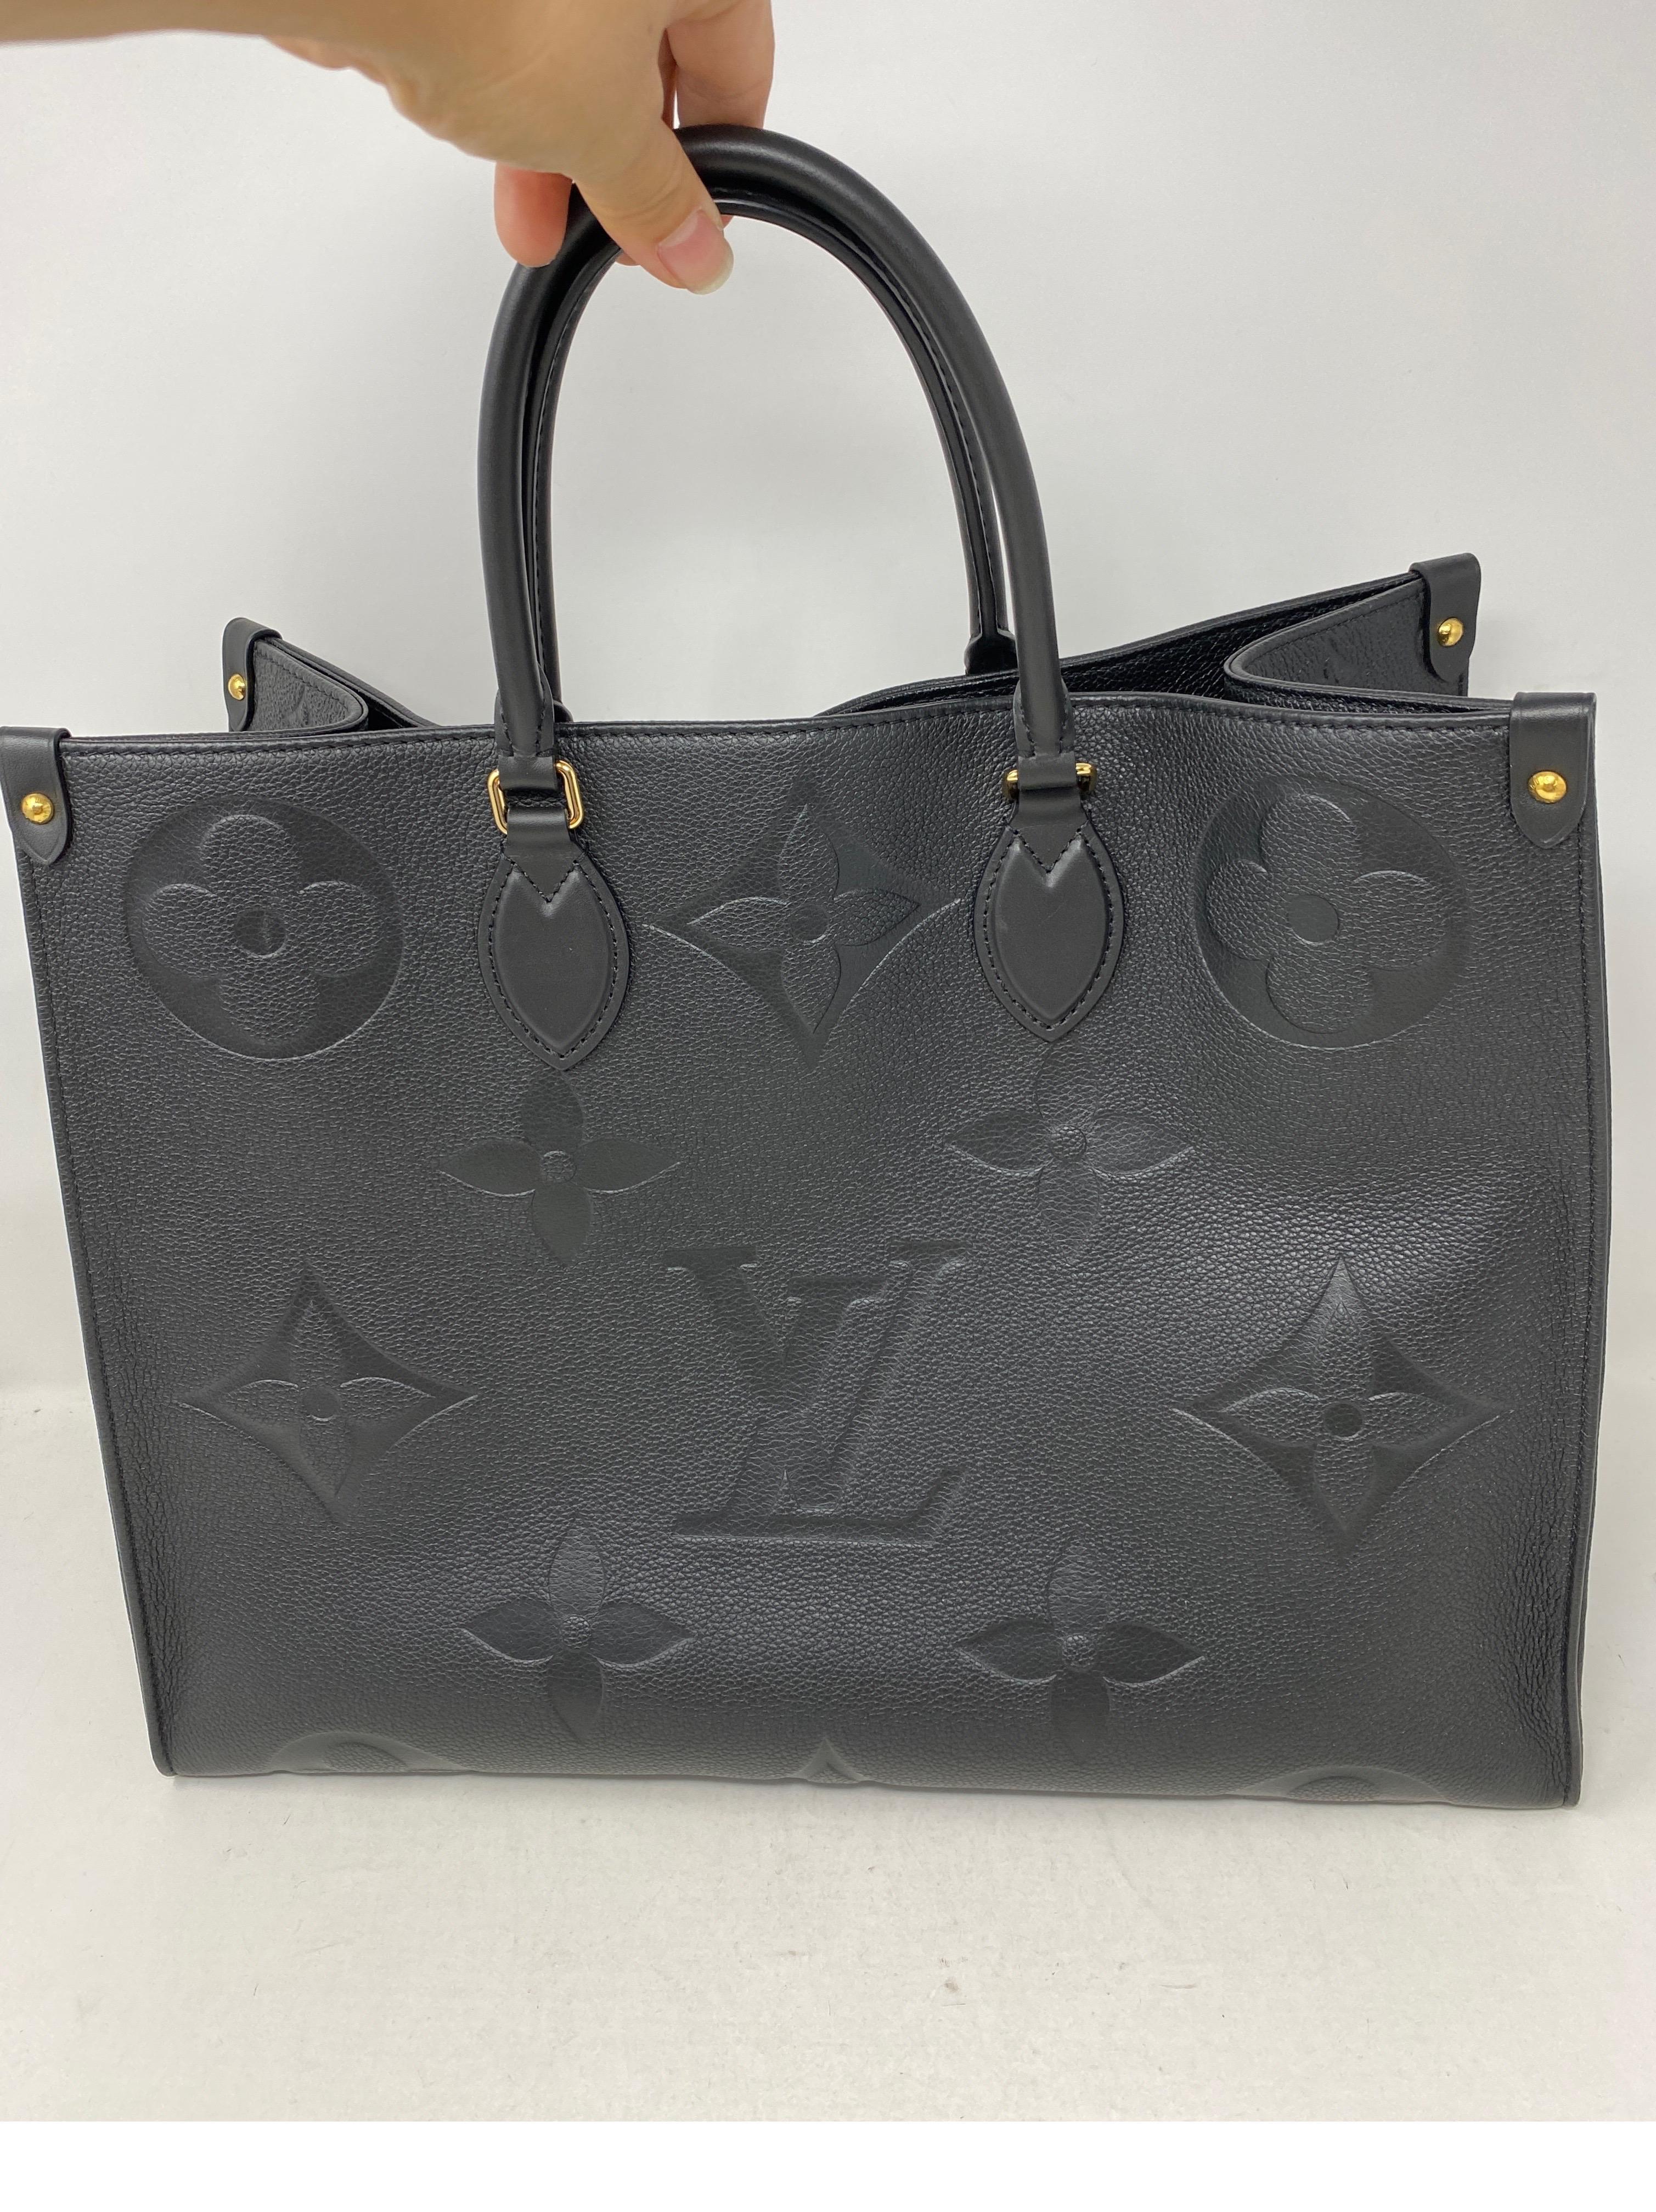 Louis Vuitton Black On The Go Bag. New collection. Hard to find. Excellent condition. Handles can be worn 2 ways. Beautiful bag. Guaranteed authentic.